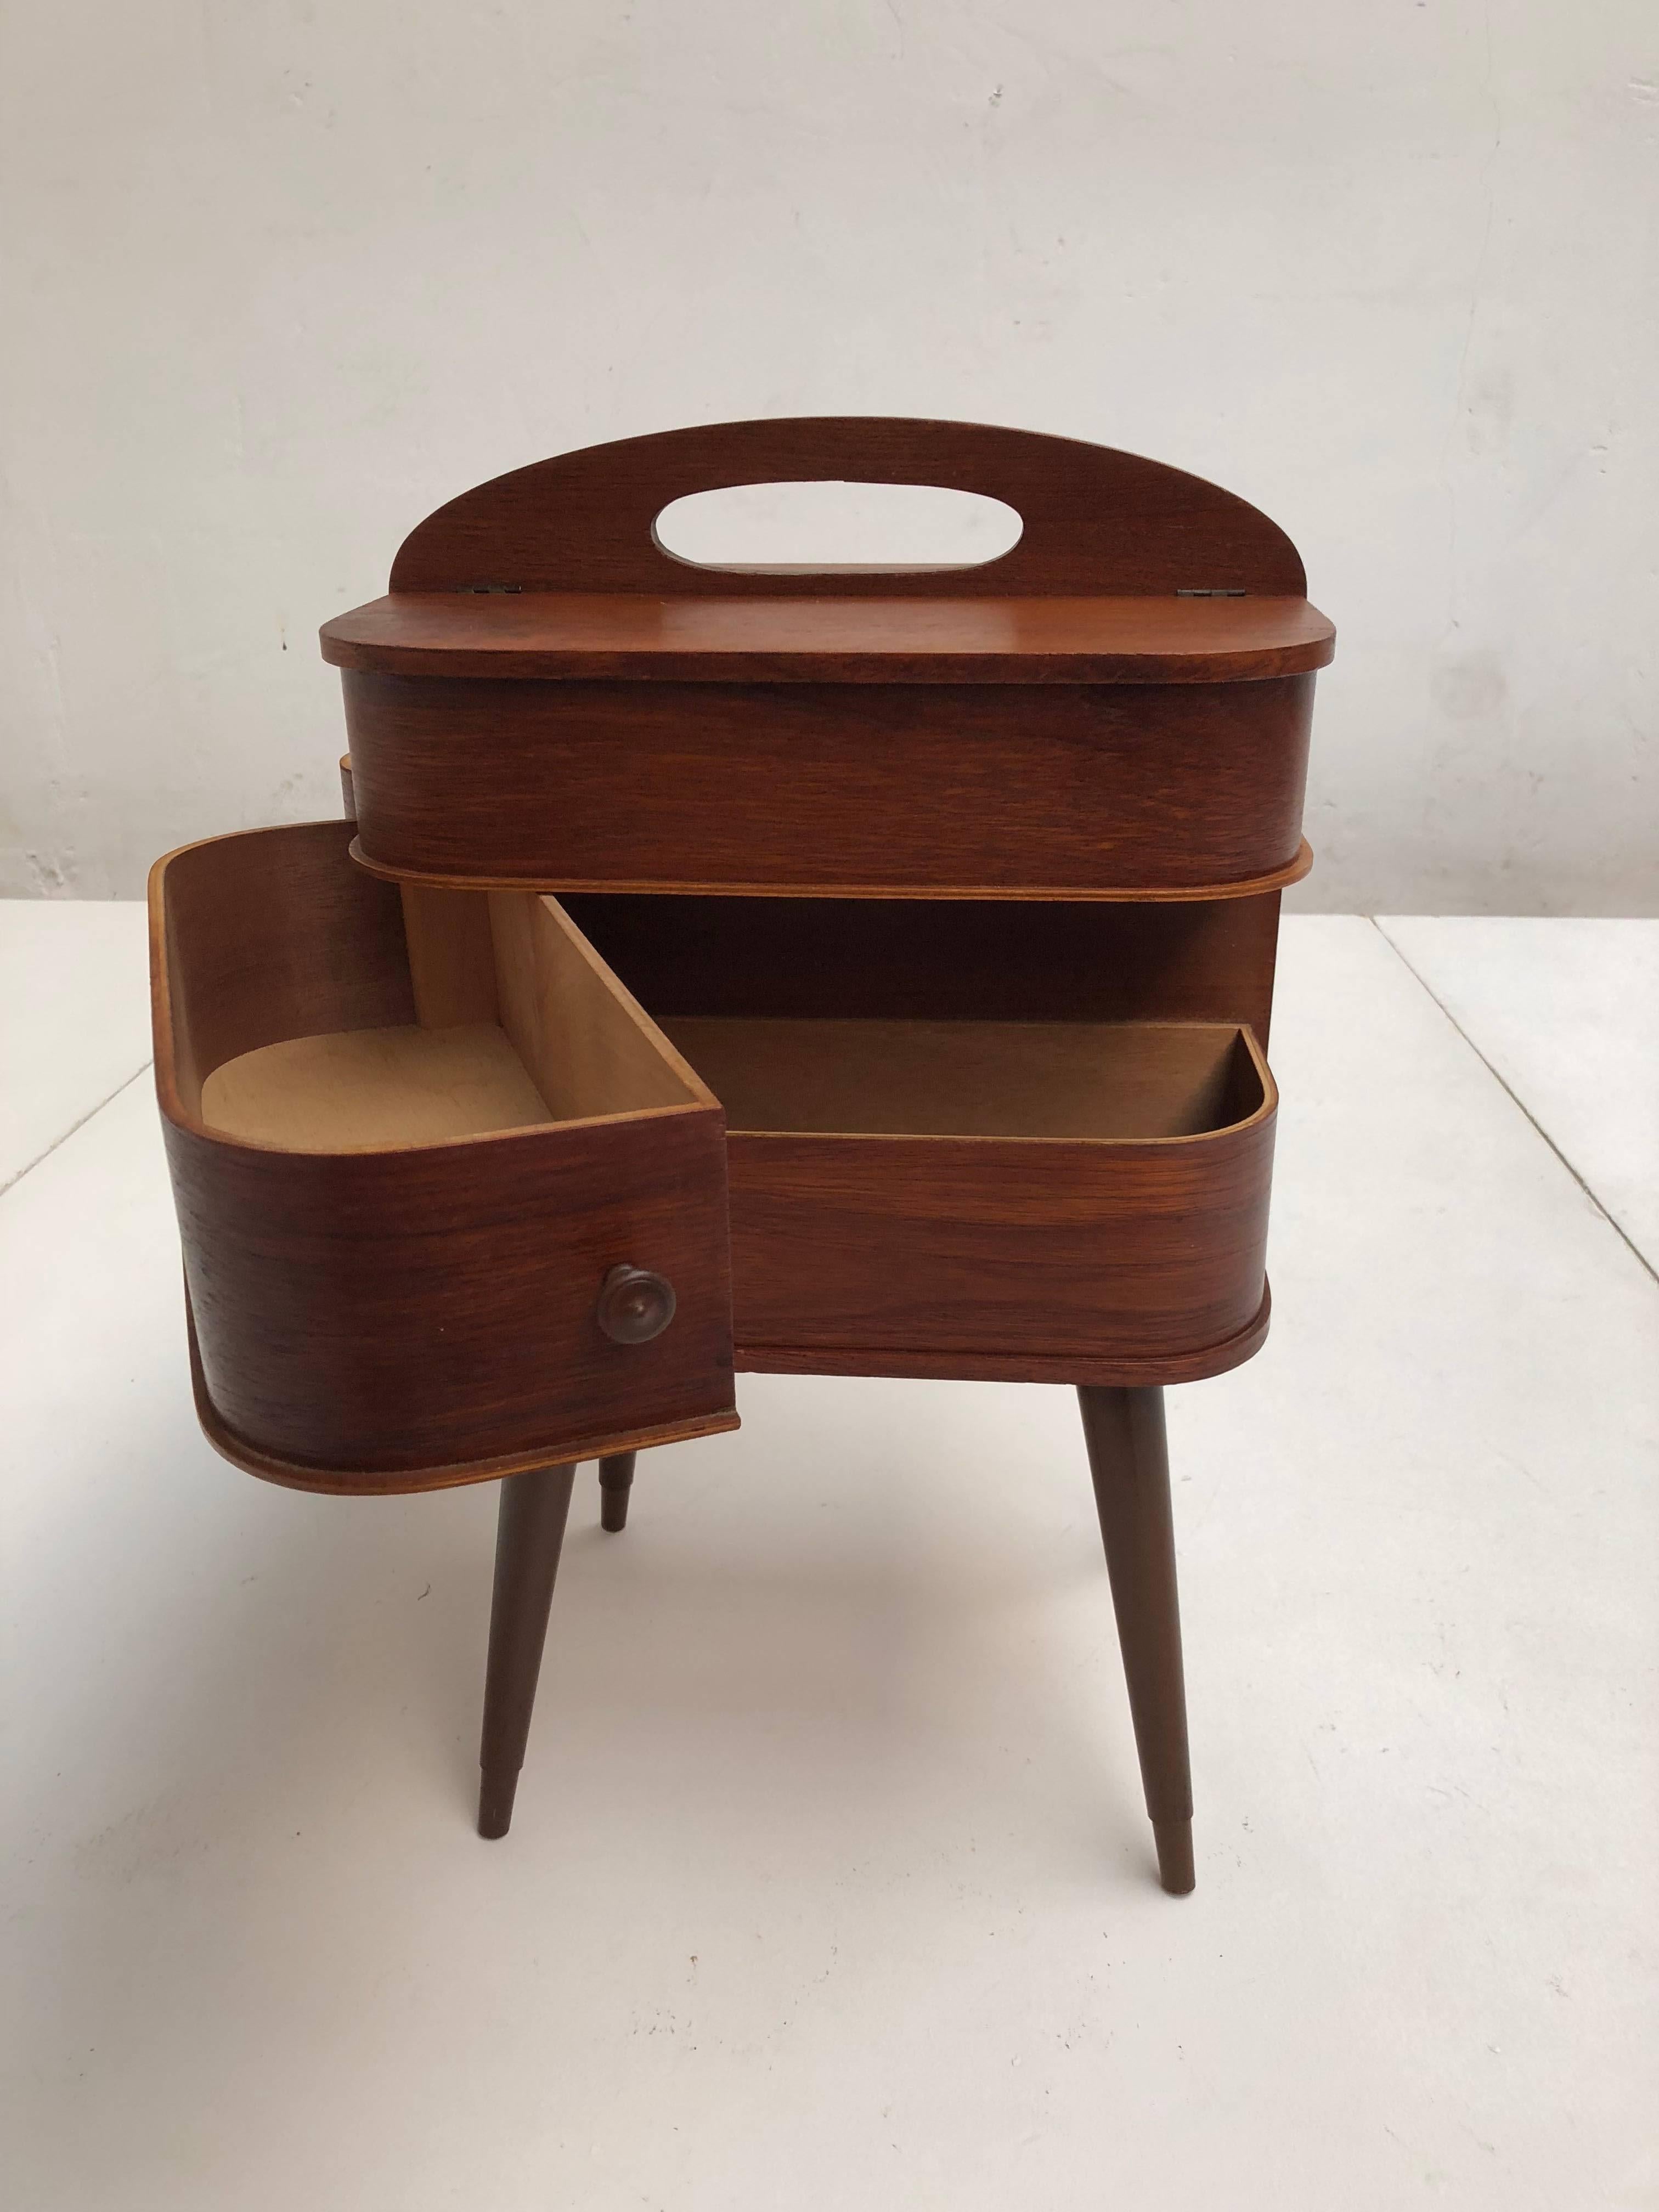 Adorable Danish Teak Plywood Sewing Box Distributed by Pastoe in the 1950s 1